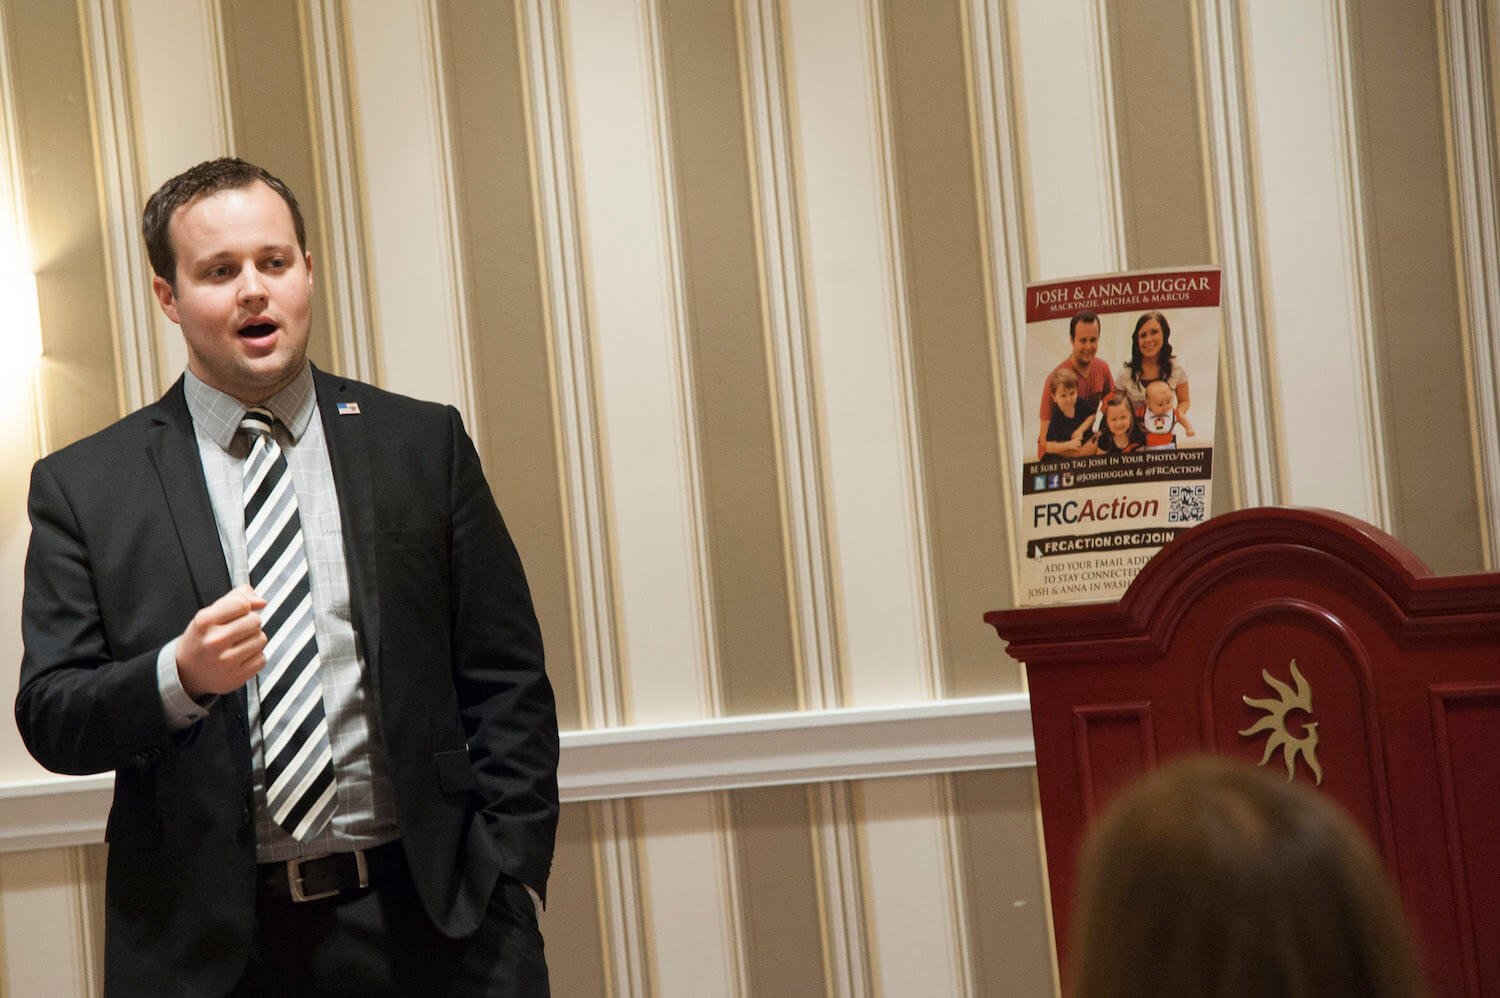 Josh Duggar of the Duggar family standing in a room wearing a suit and tie